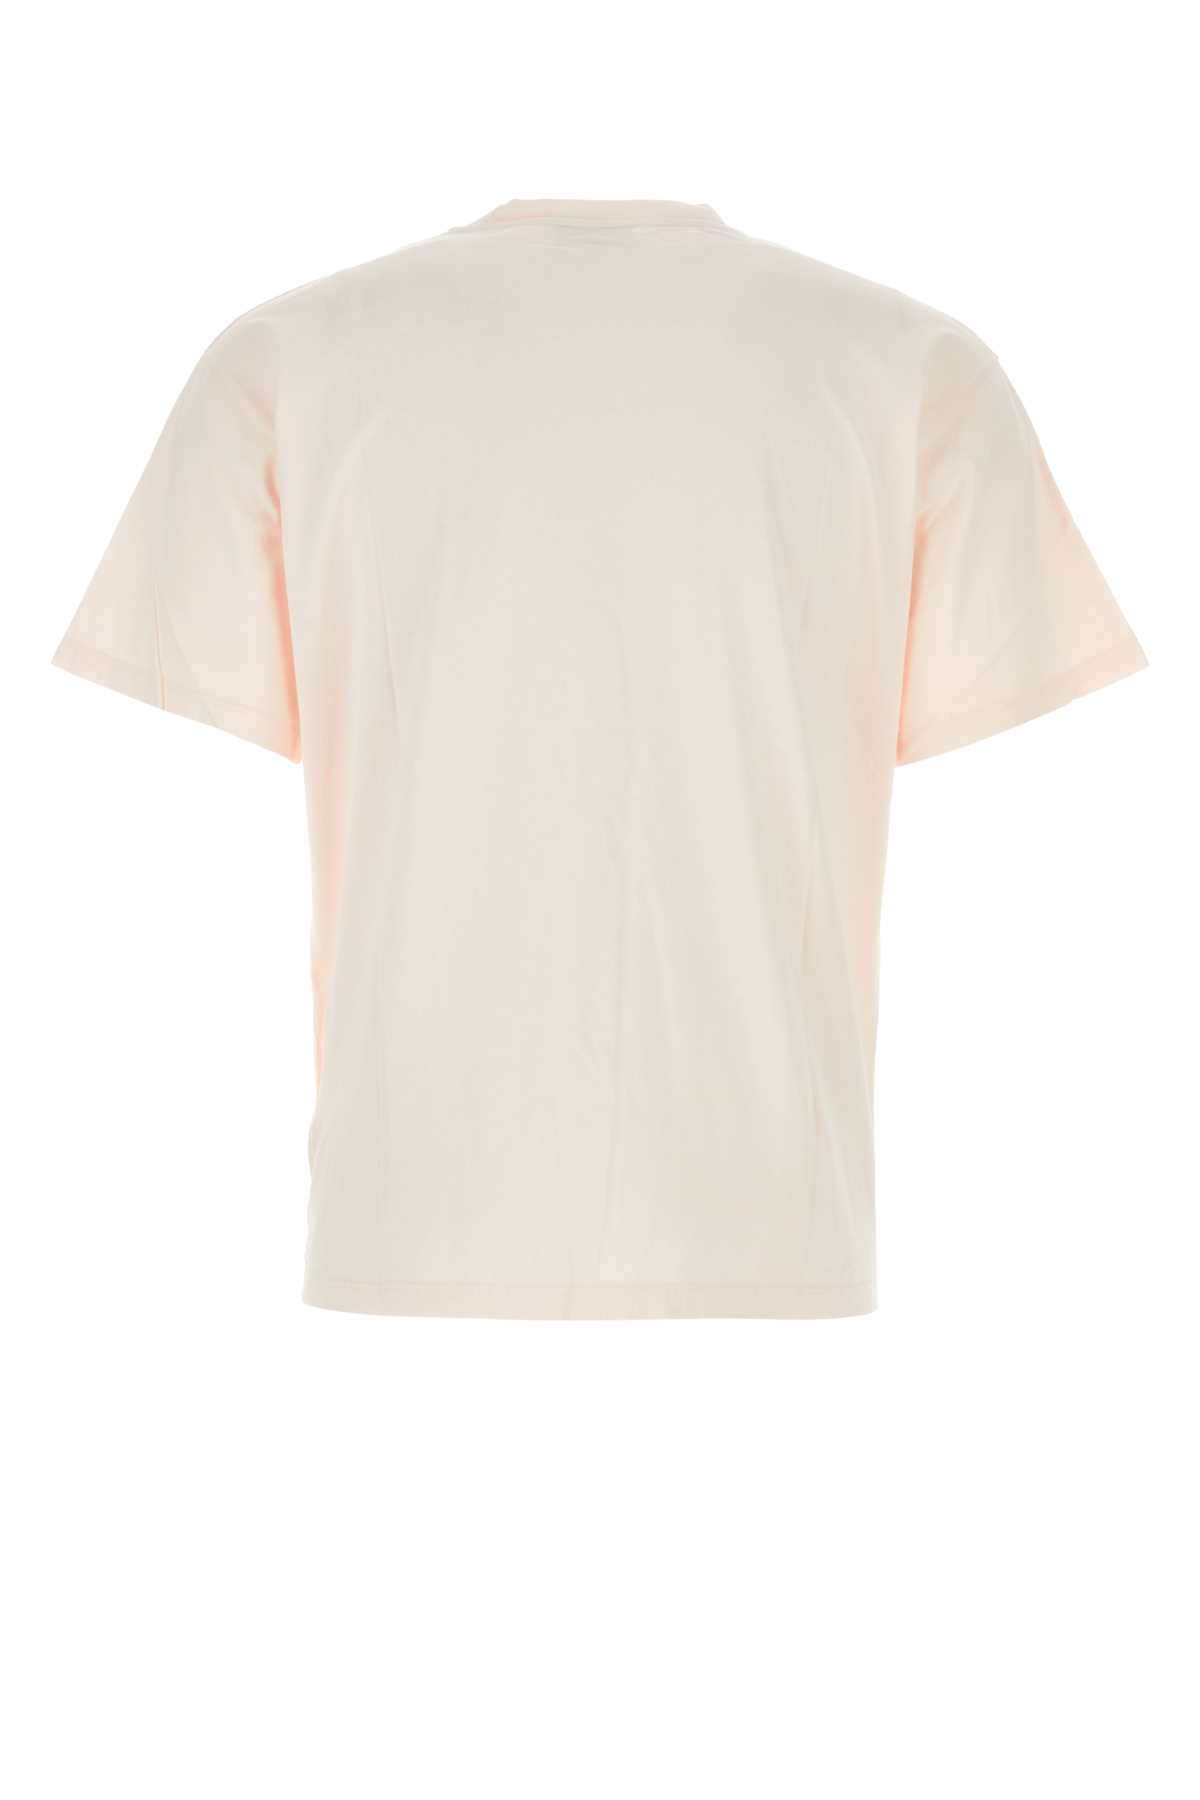 Aries Pastel Pink Cotton Temple T-shirt In Palepink